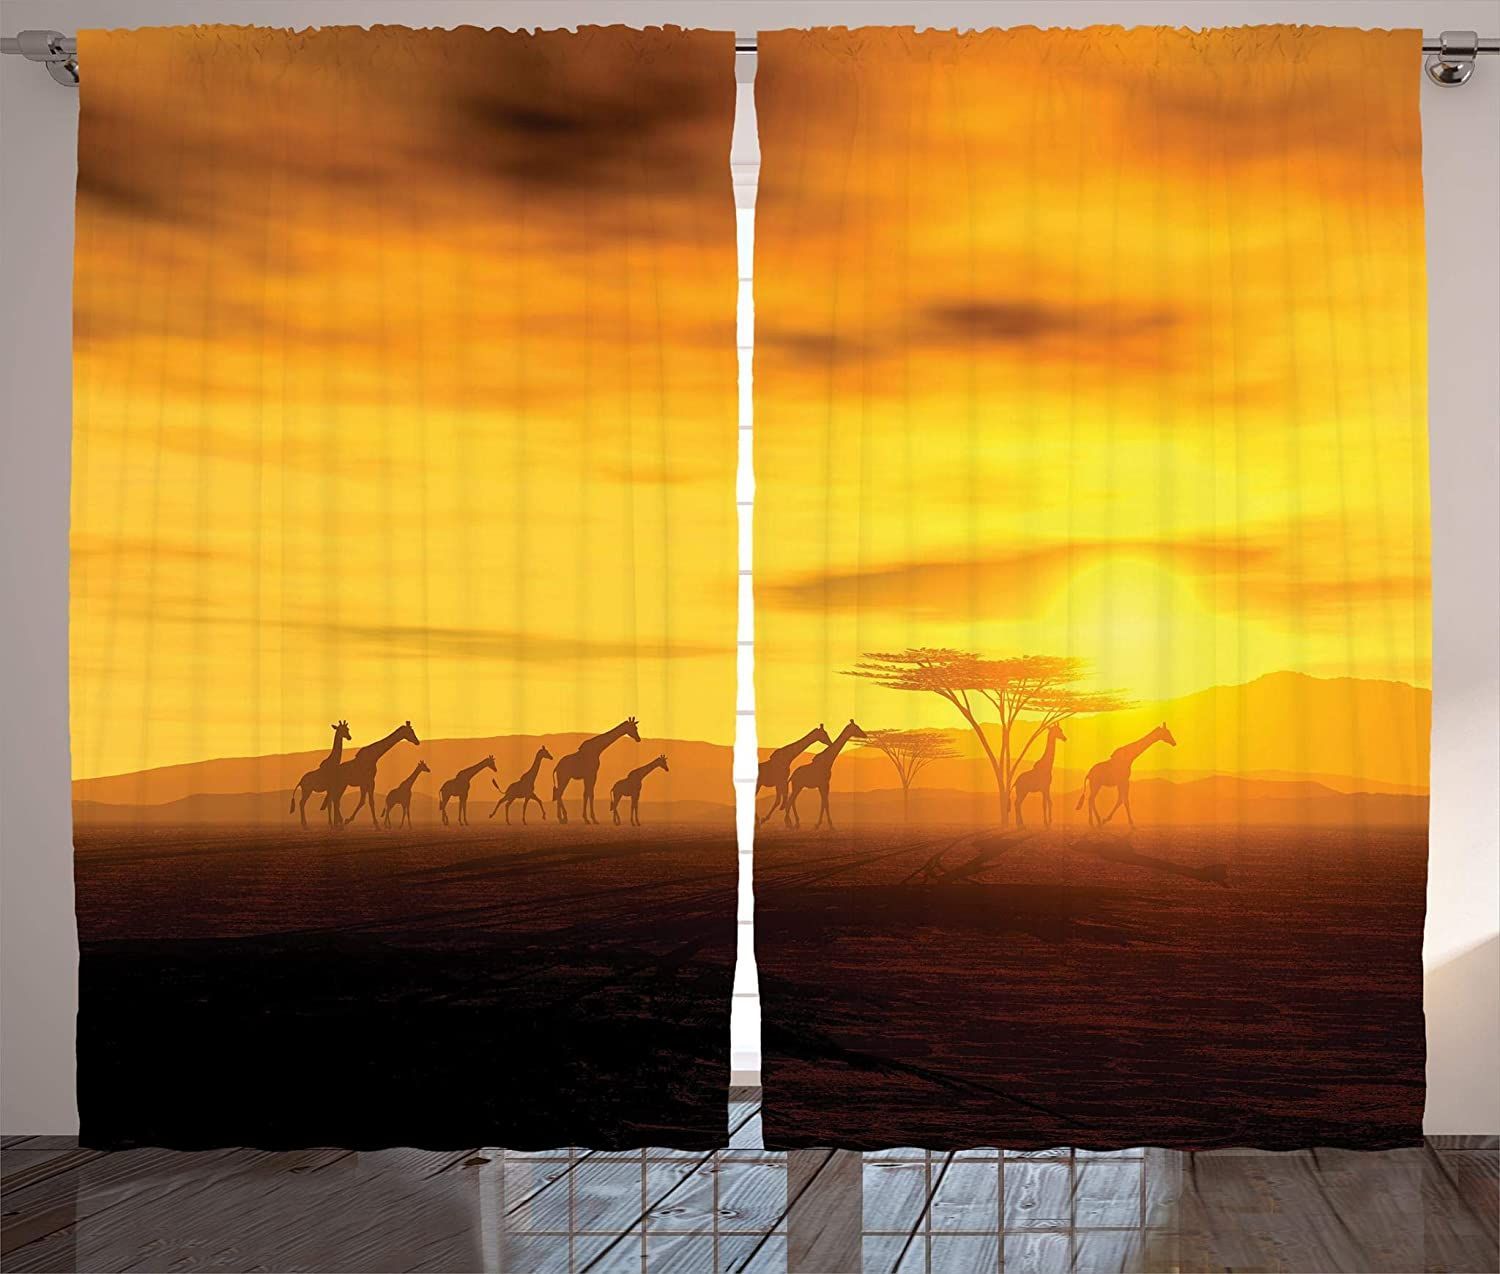 Giraffes At Sunset Dramatic Clouds Sky And Earth Horizon Wildlife Printed Window Curtain